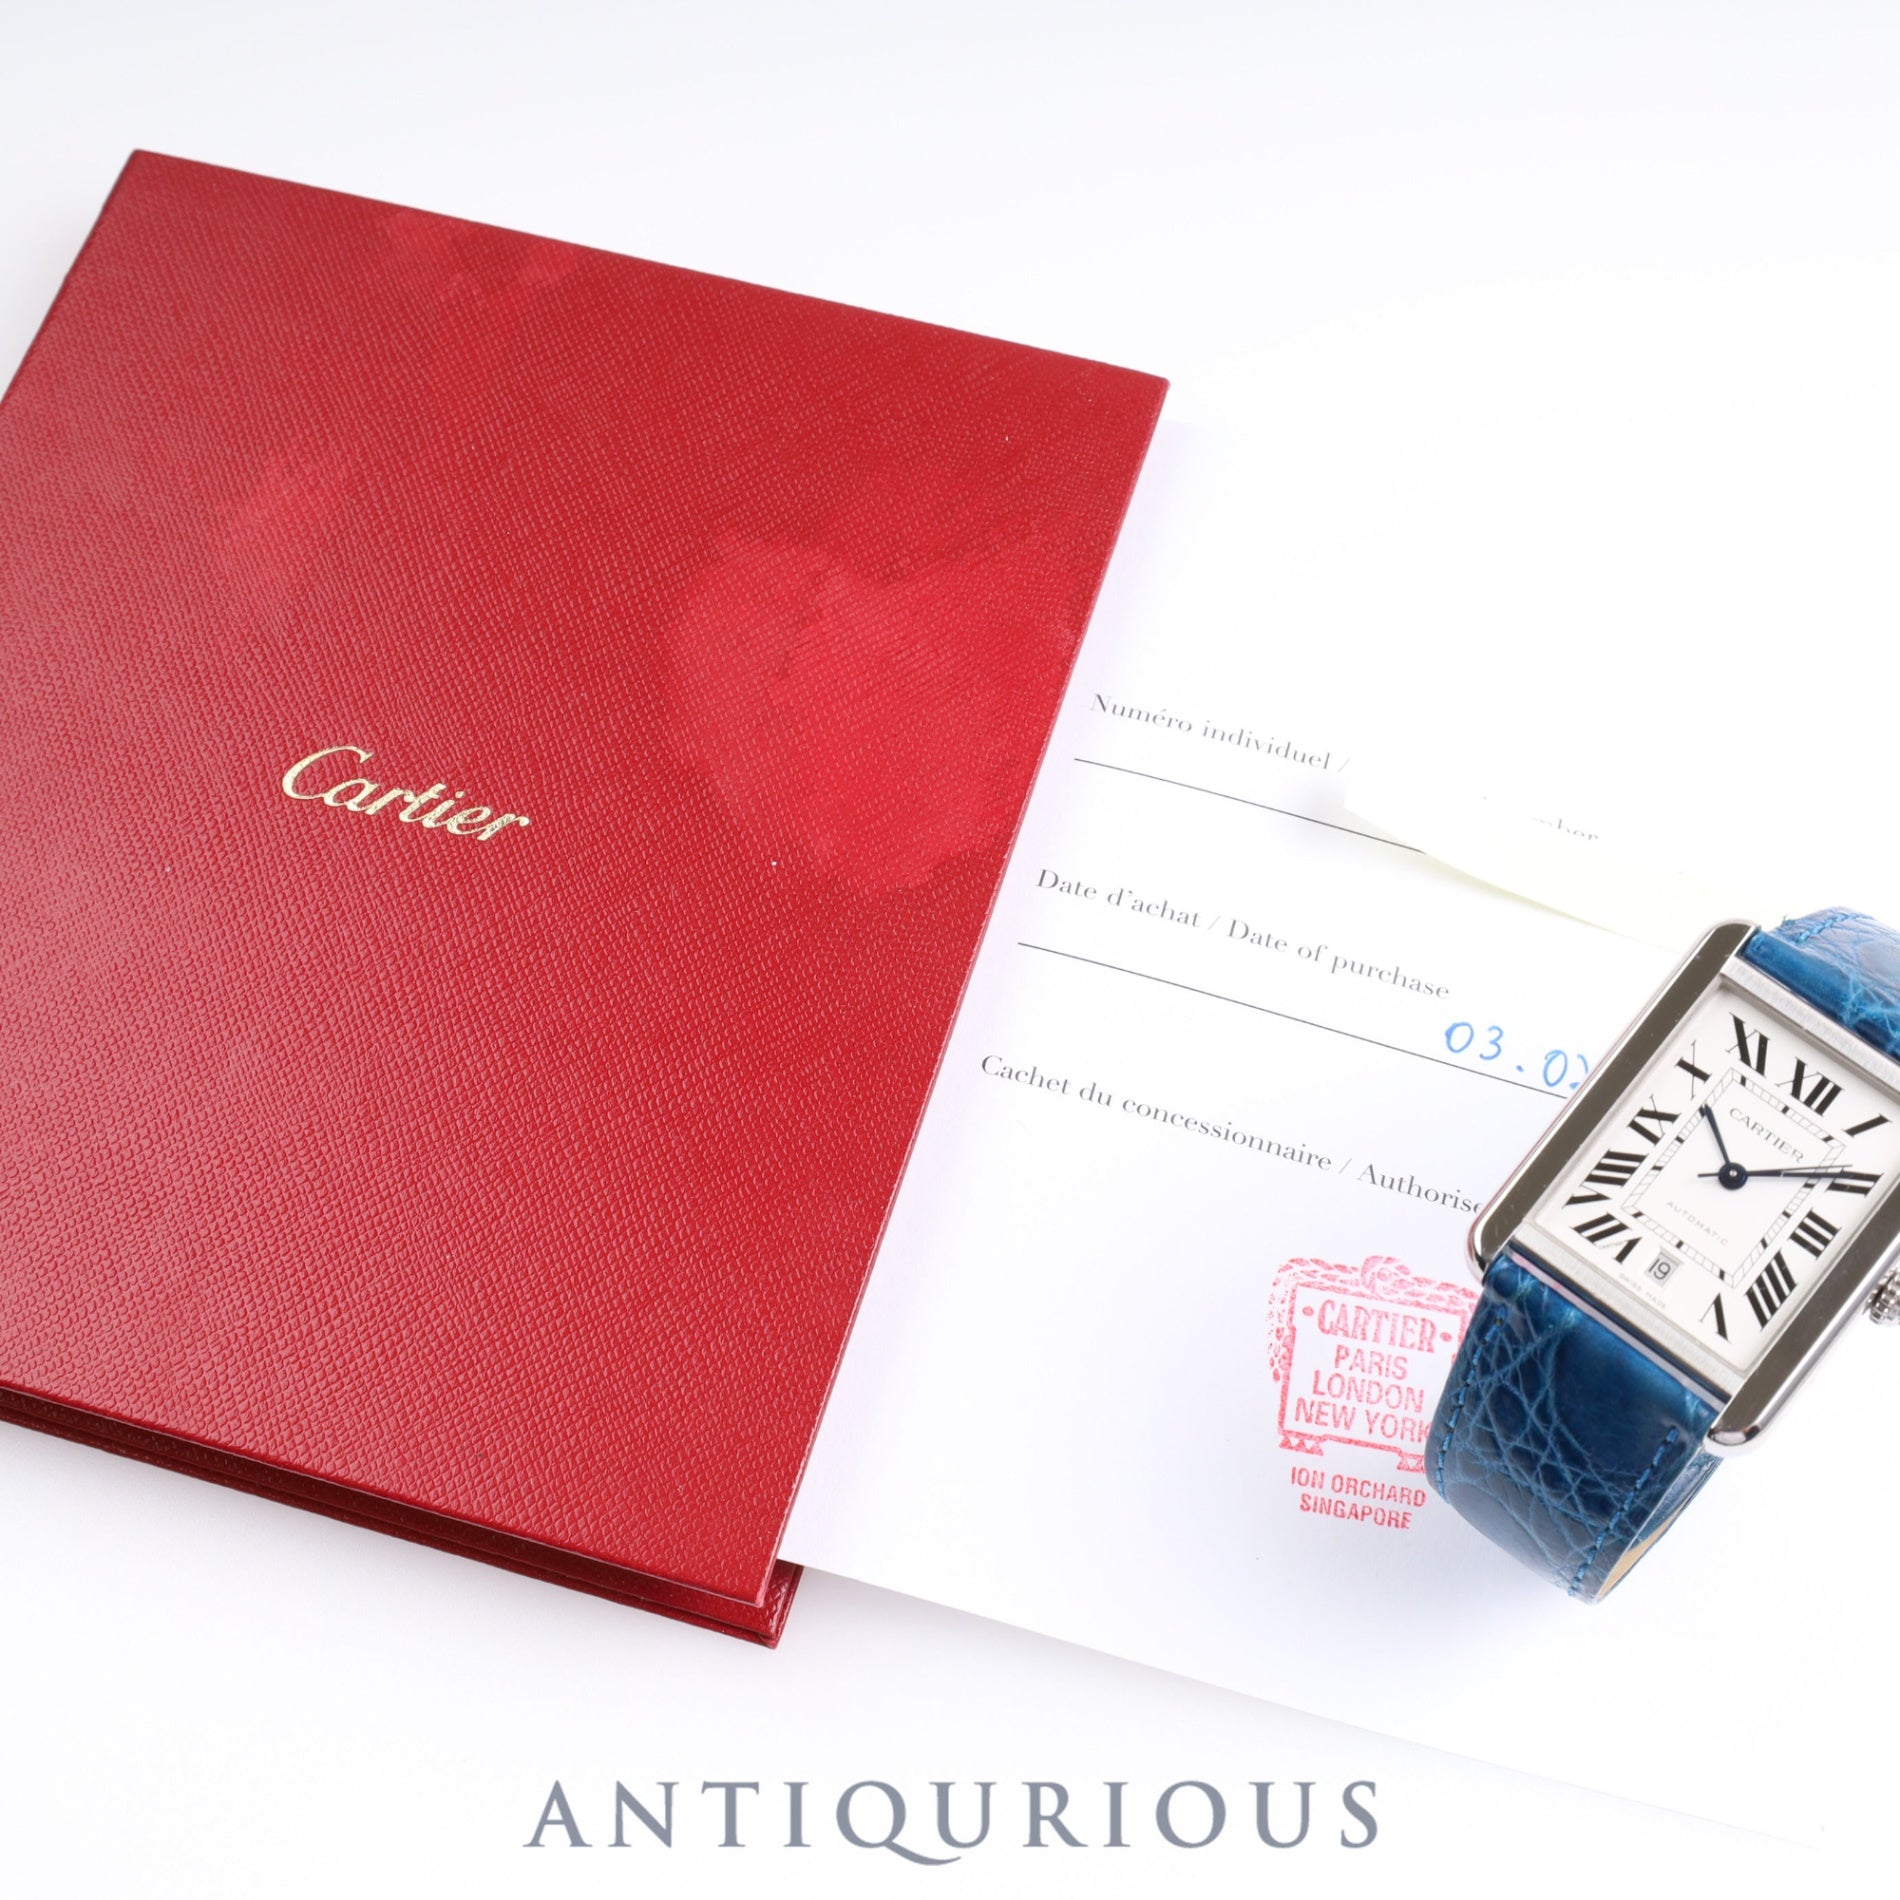 CARTIER Tank Solo XL AT Cal.049 W5200027 SS Leather Silver Dial Warranty (2015) Complete Service